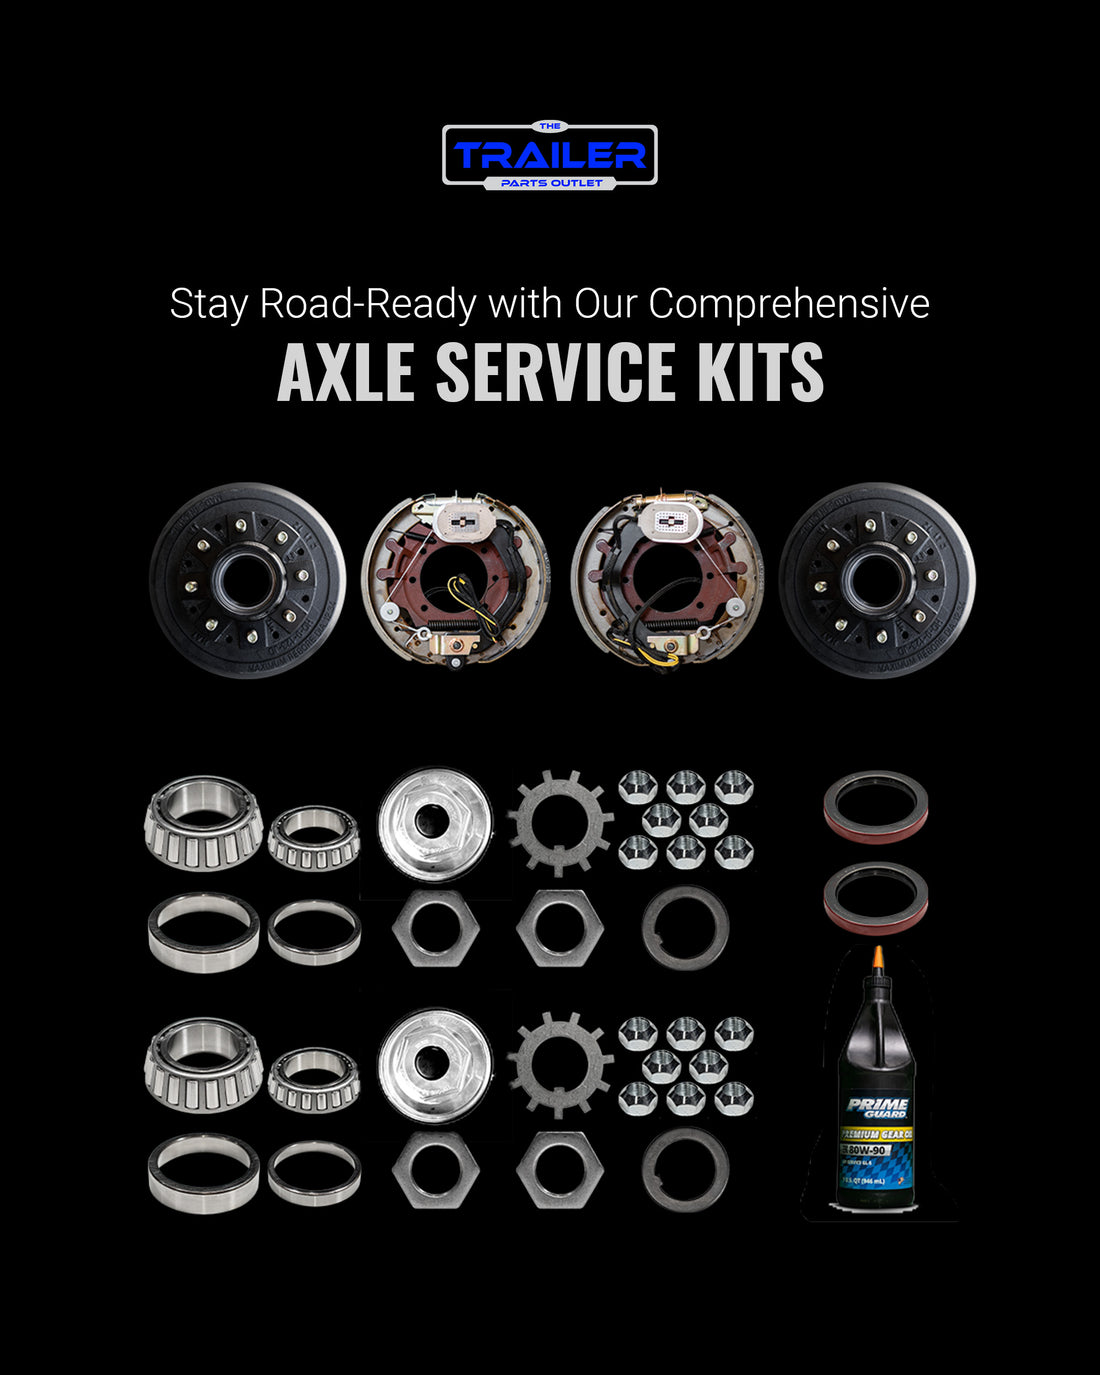 Premium All in One Trailer Axle Service Kits includes Trailer Axle bearings, Trailer Axle Hubs and Drums, Grease and more | The Trailer Parts Outlet